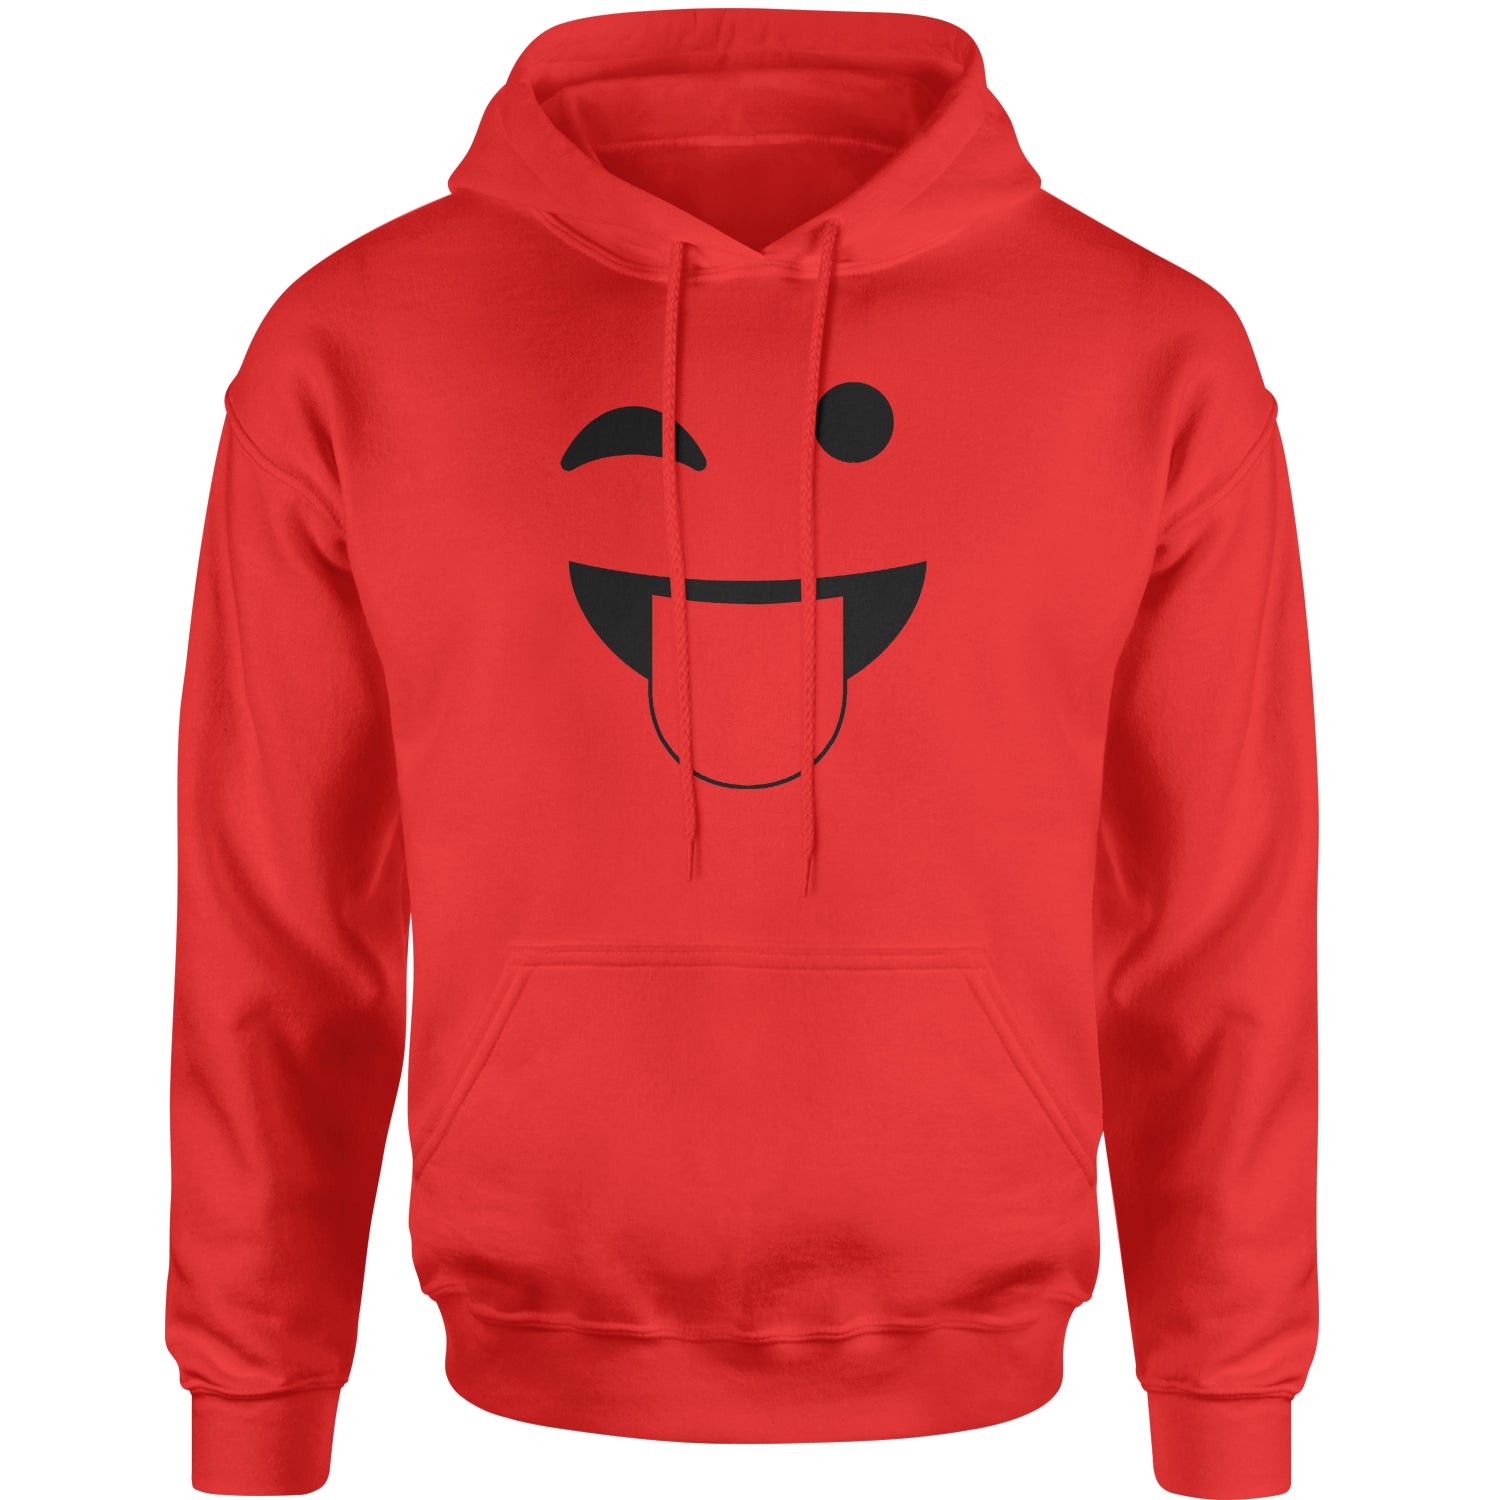 Emoticon Tongue Hanging Out Smile Face Adult Hoodie Sweatshirt cosplay, costume, dress, emoji, emote, face, halloween, smiley, up, yellow by Expression Tees